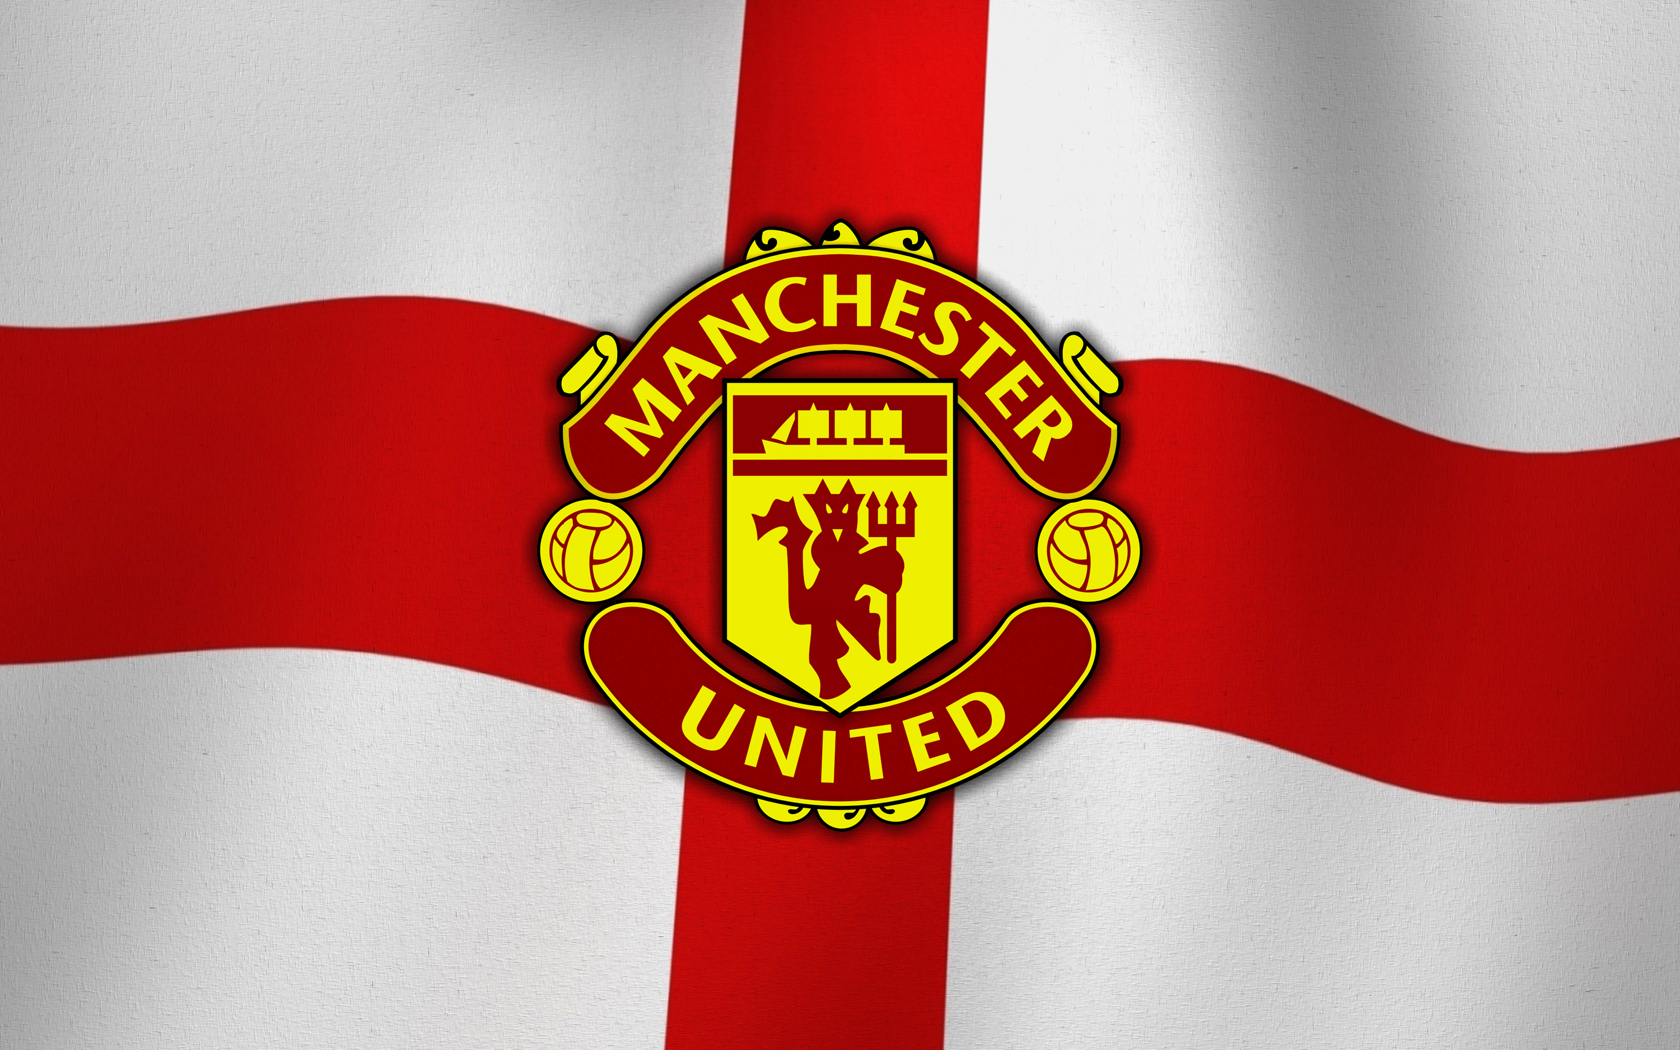 Download Manchester United Logo Wallpaper Computers pictures in high